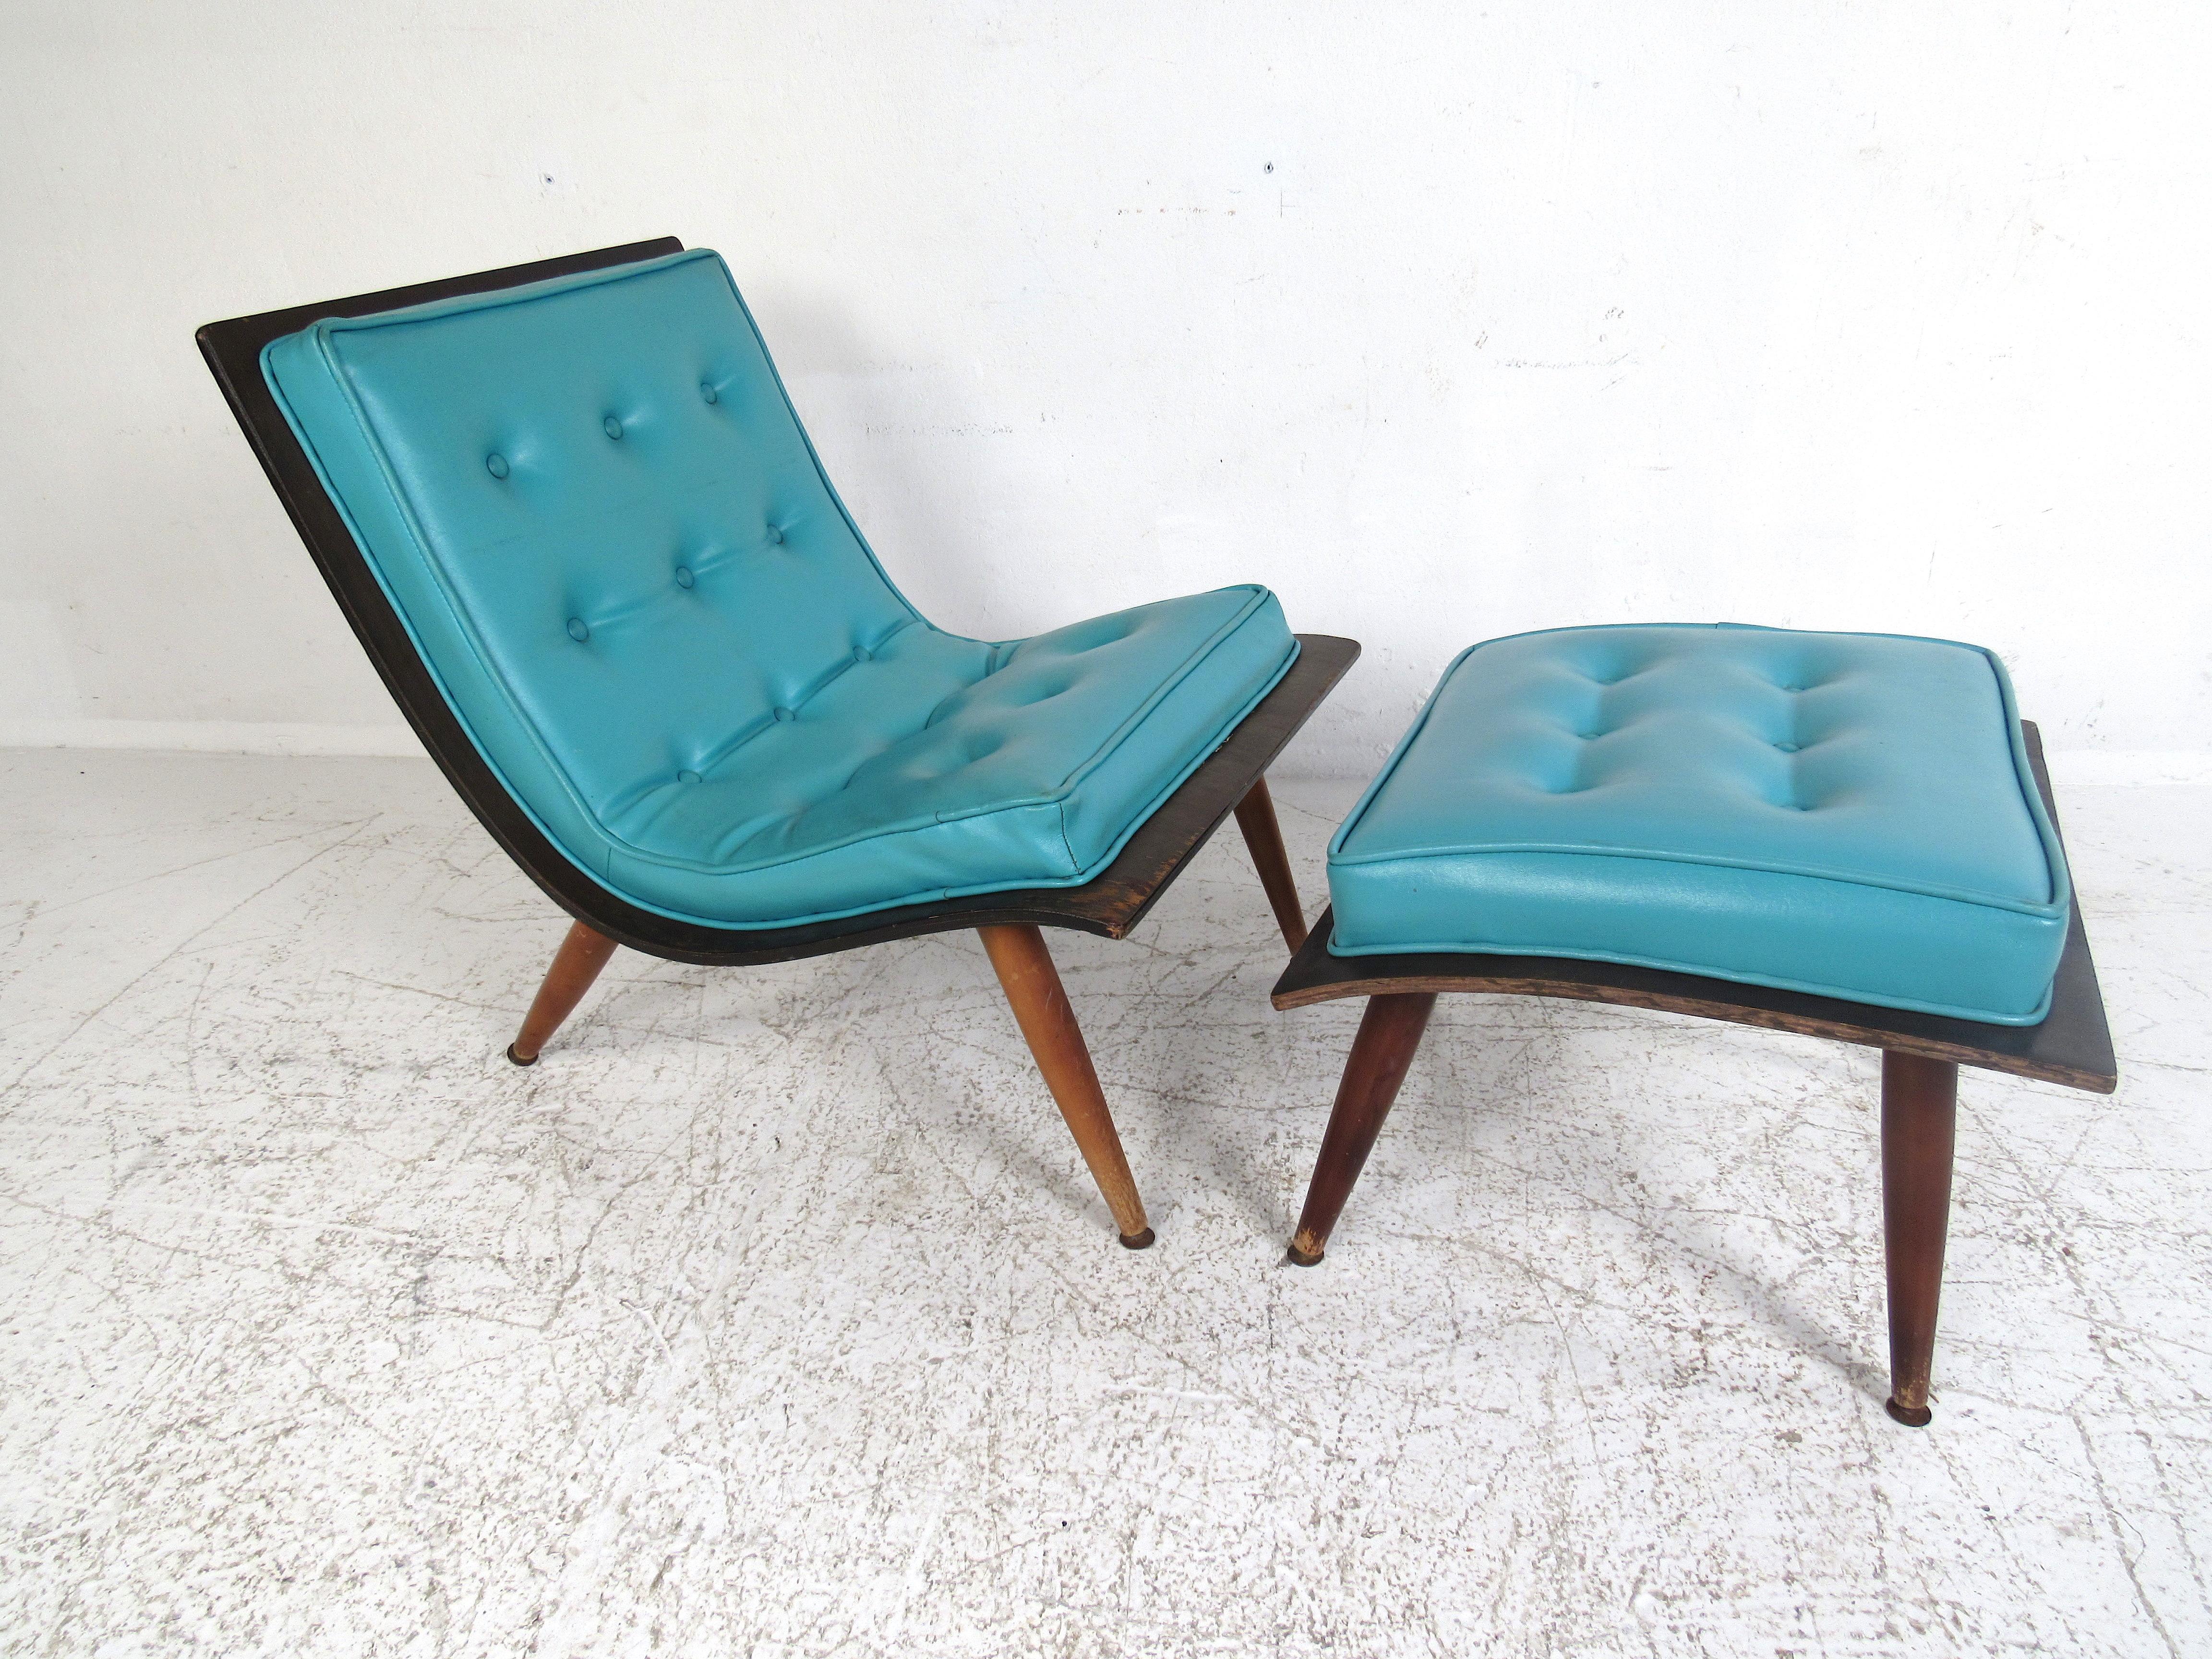 This beautifully vibrant midcentury chair and ottoman are a must-have for any upbeat living room or home office. Featuring dark wood and bright turquoise cushions this set will add character and charm to any space it is in. It features a simplistic